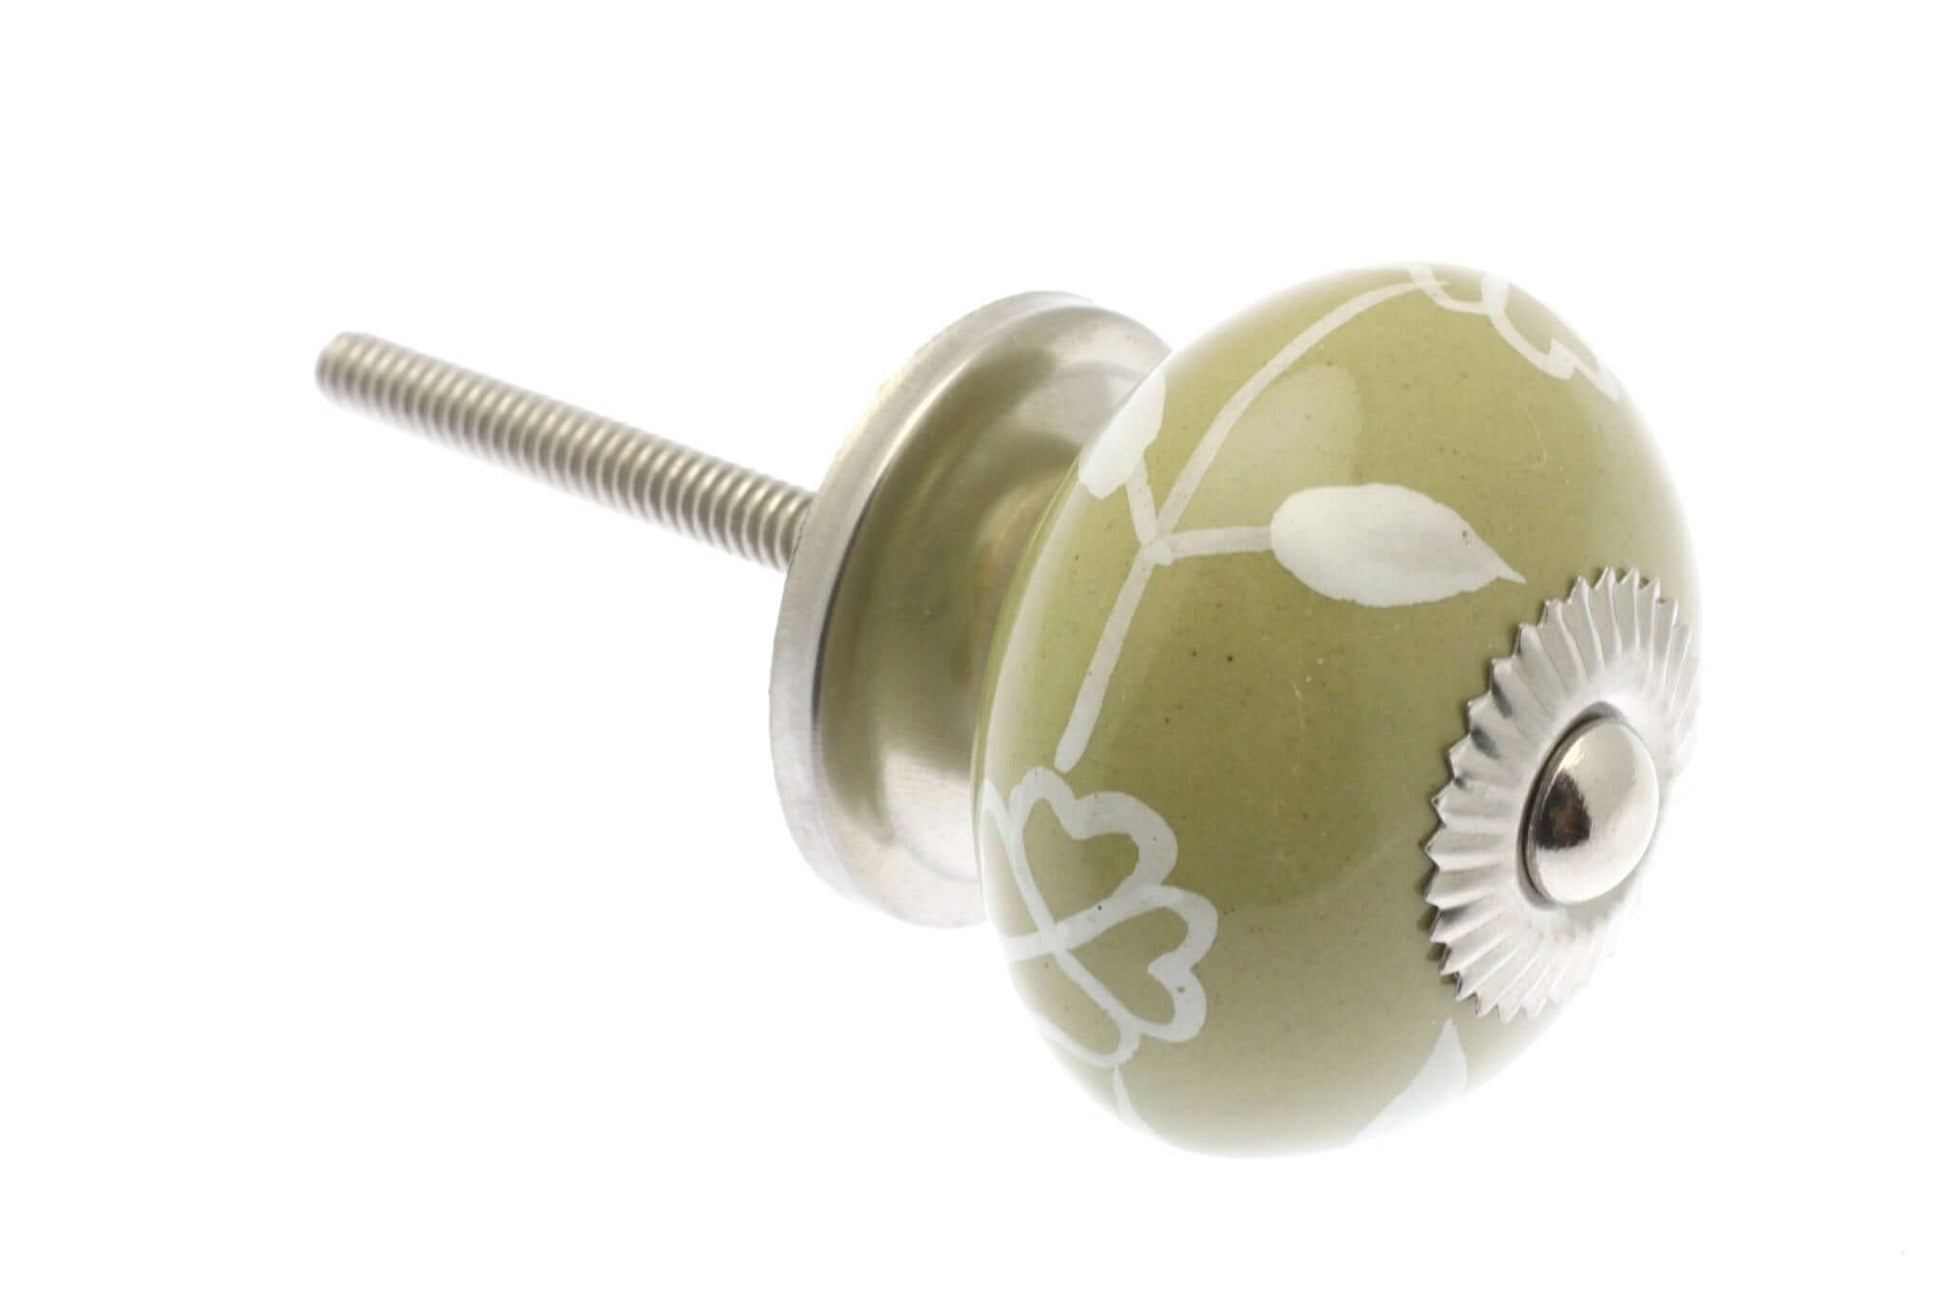 Ceramic Cupboard Knobs - White Floral Garland On Taupe 40mm Round Ceramic Cupboard Knob - Polished Chrome Base & Fixings (EF-04-WTP)